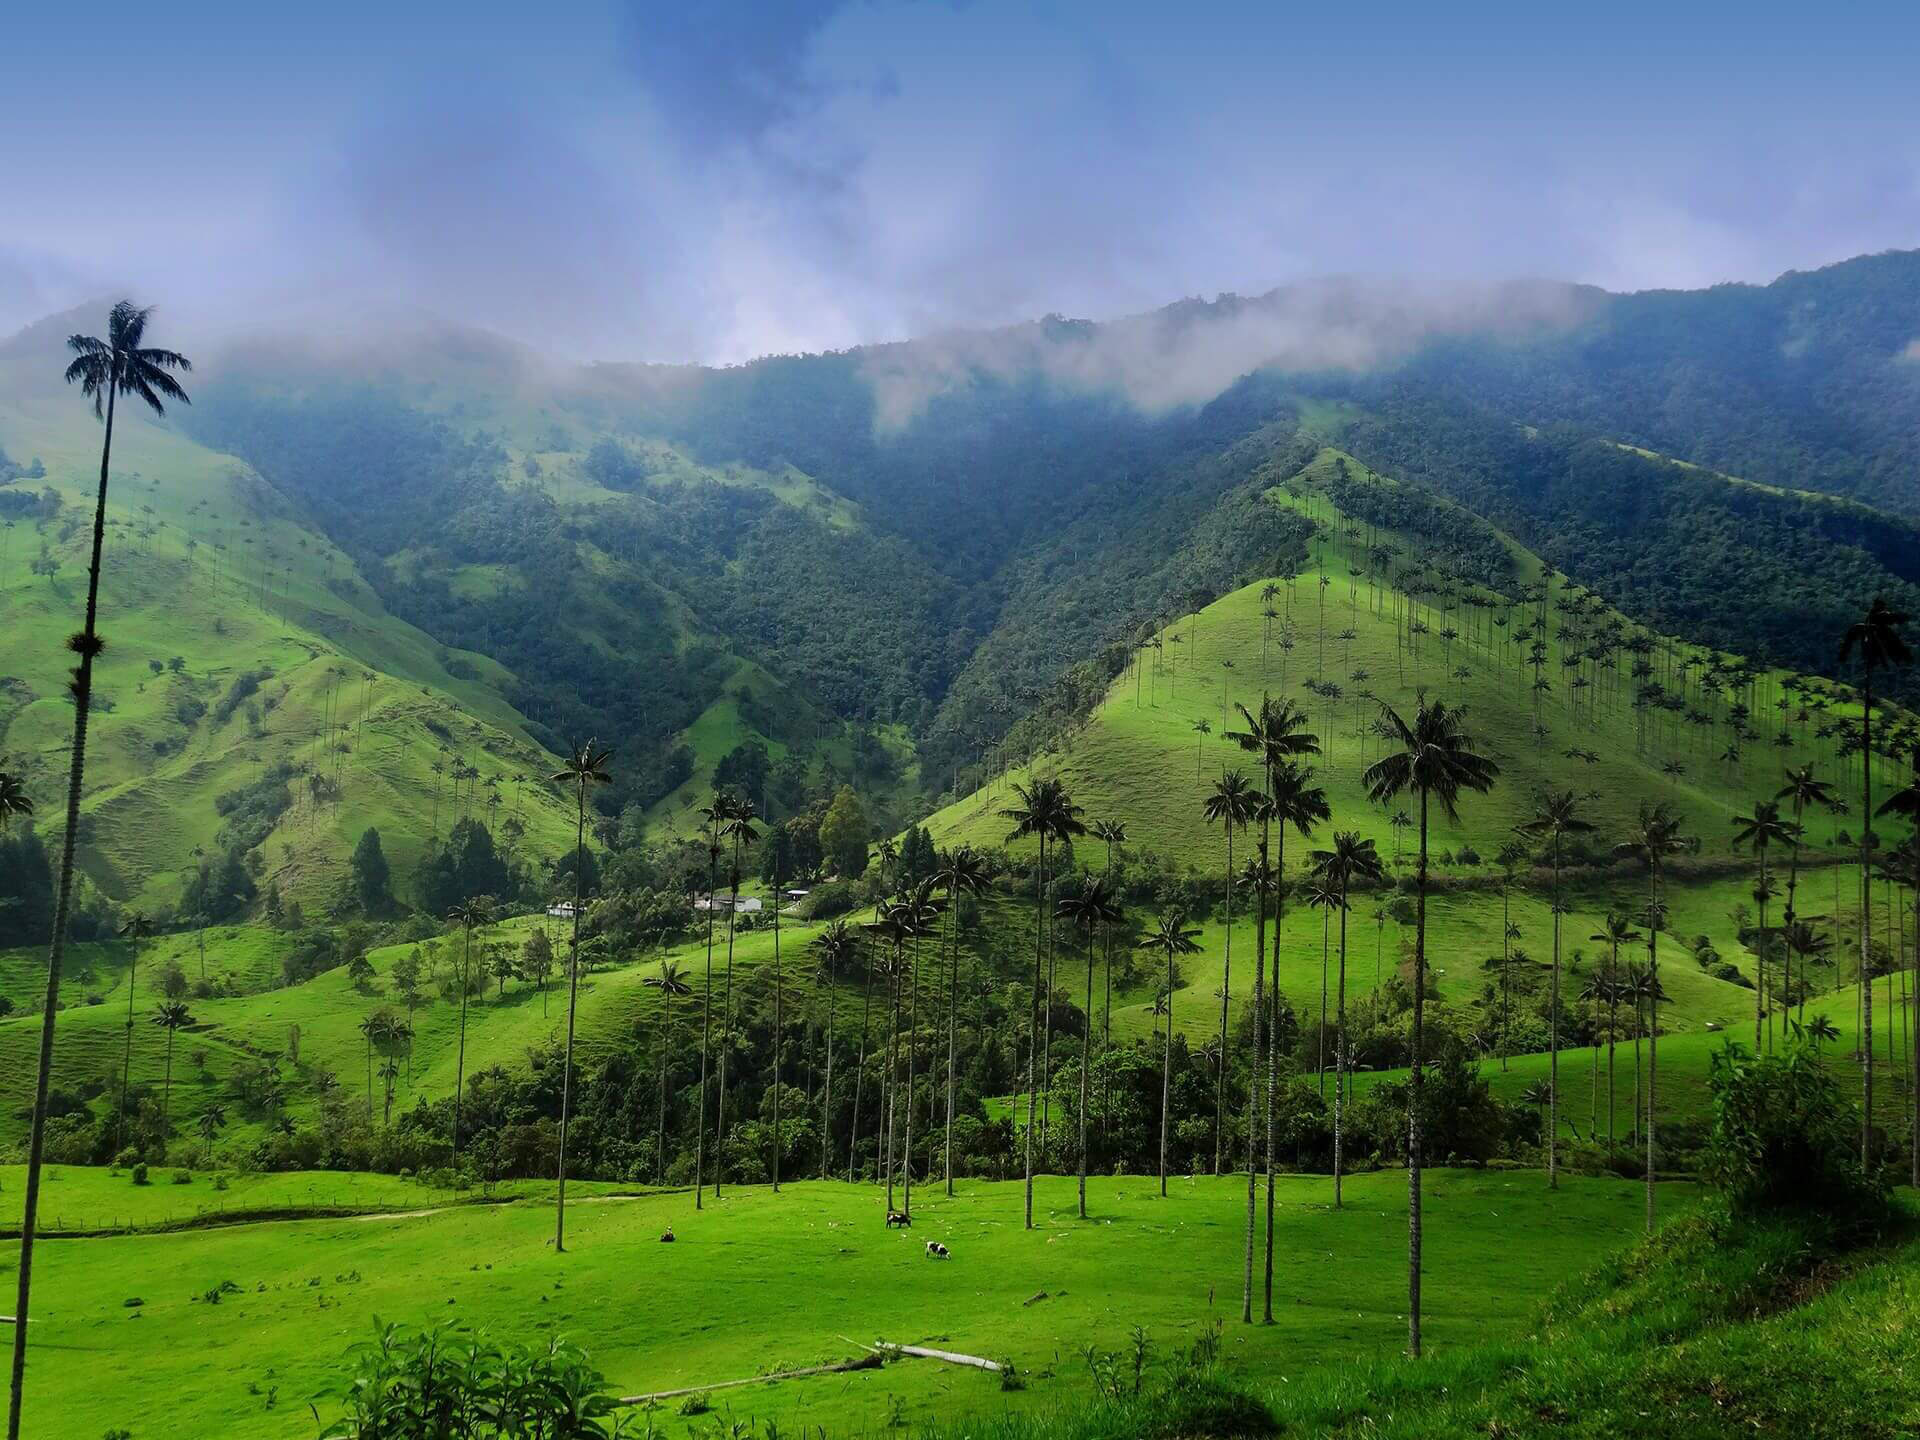 Landscape with wax palm trees peeking through the clouds in the lush moutains of Colombia's Cocora Valley